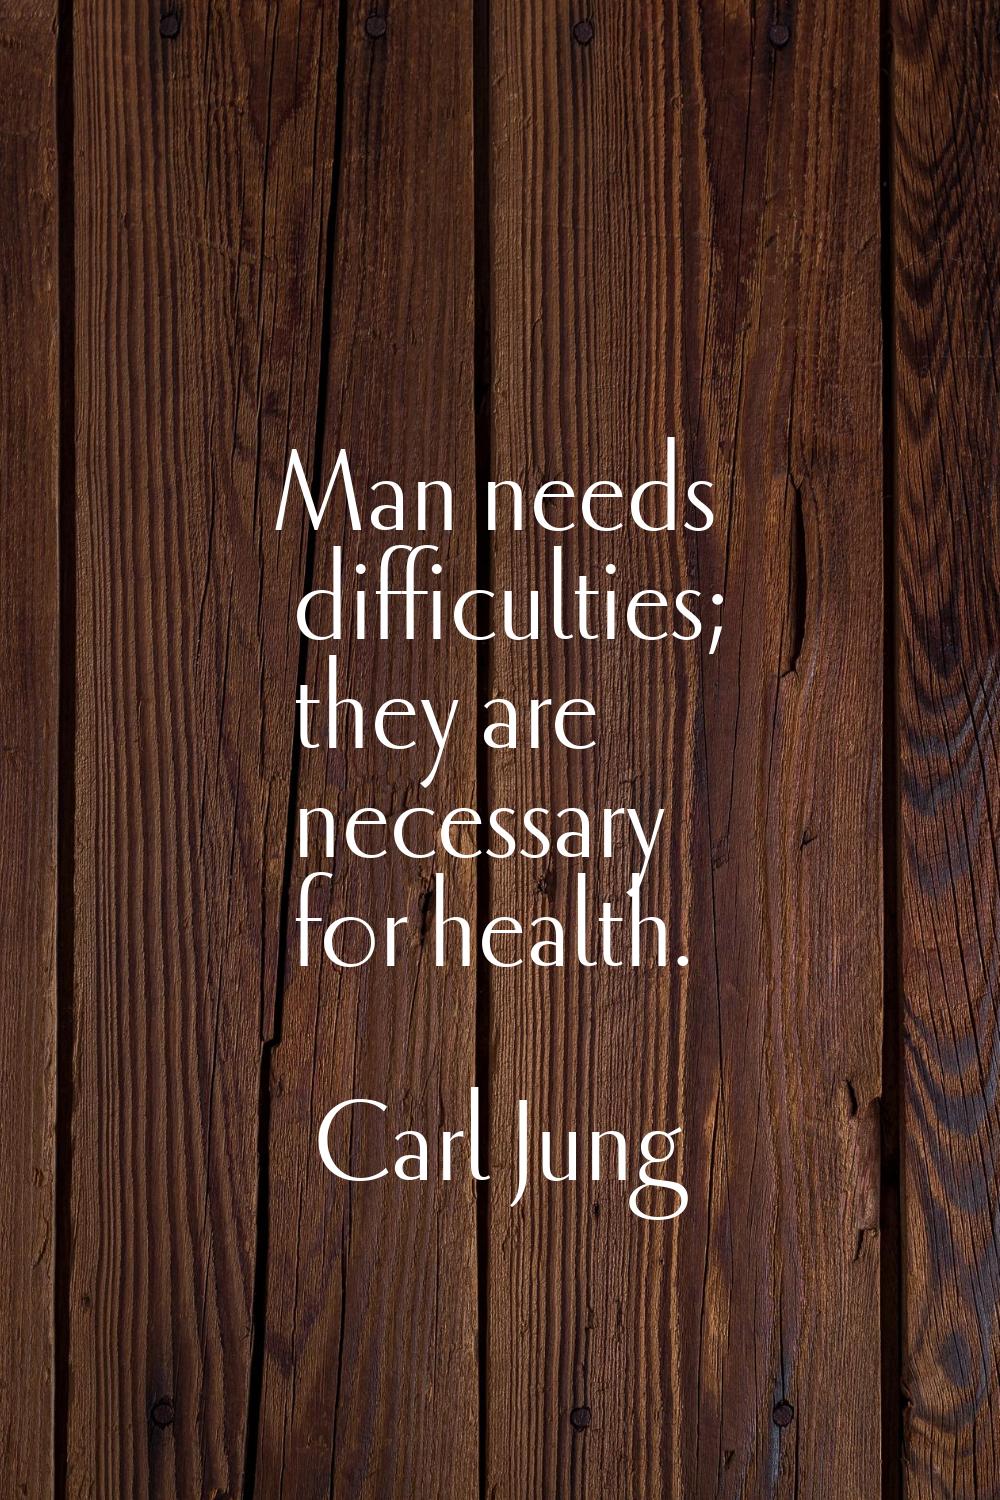 Man needs difficulties; they are necessary for health.